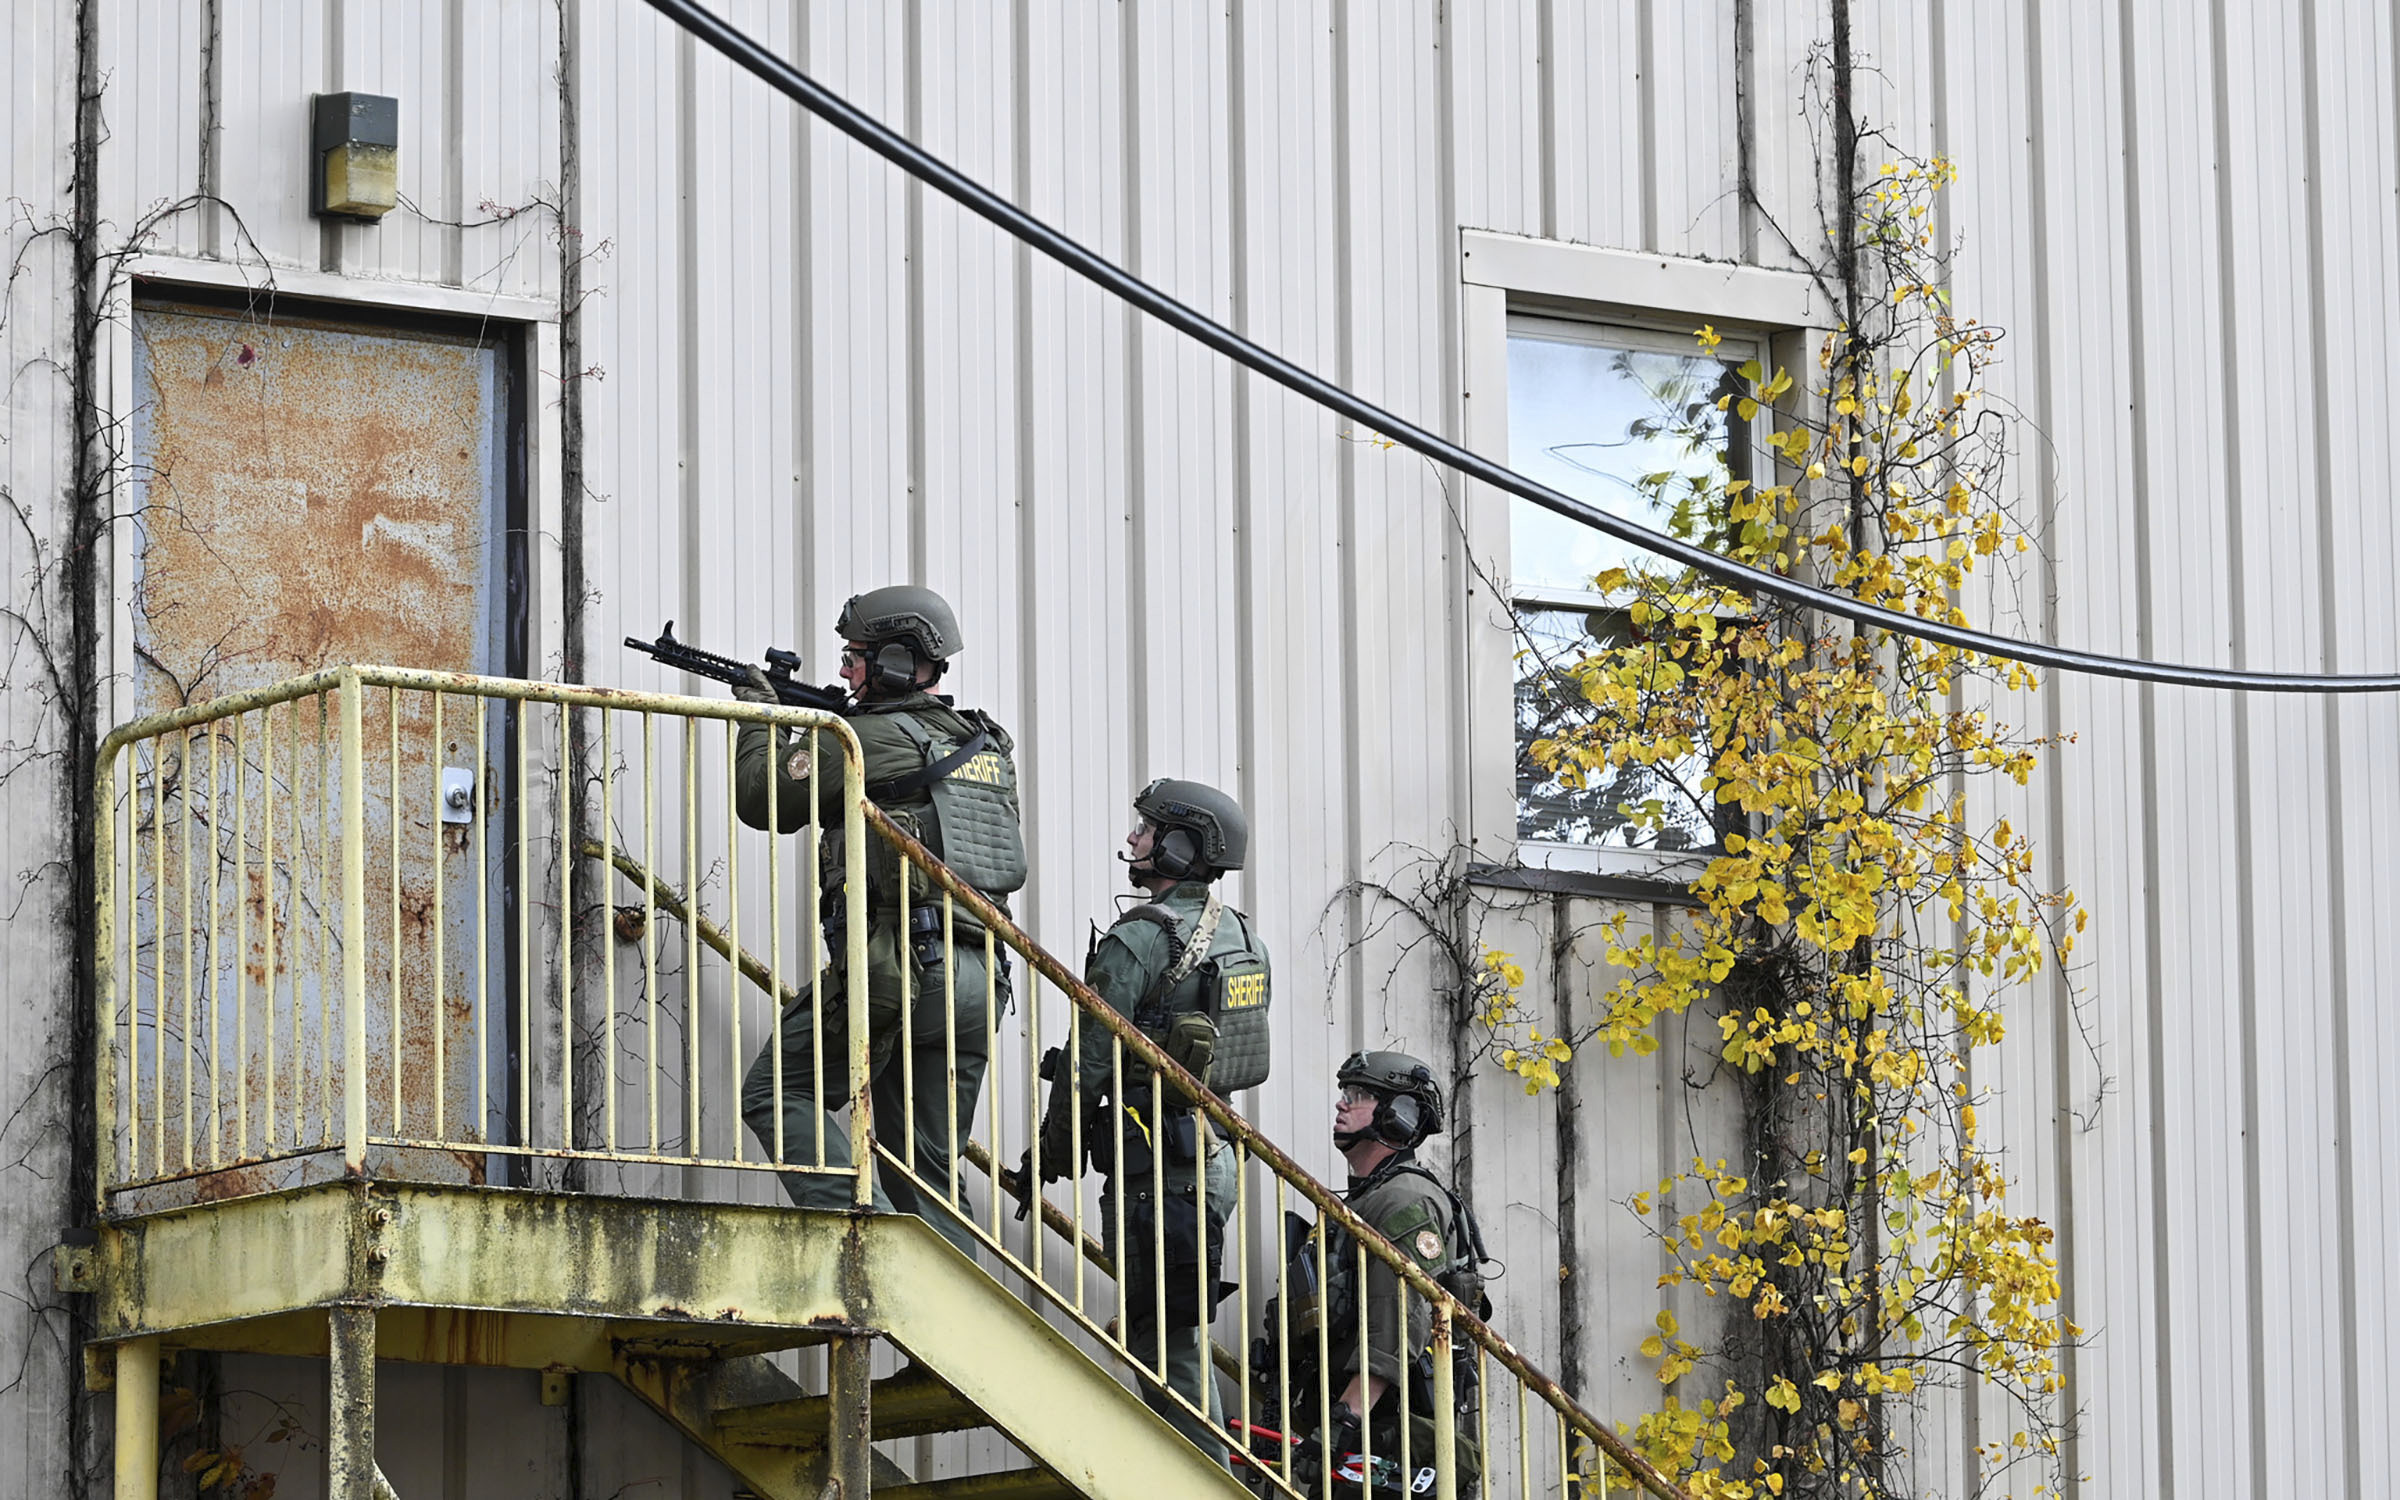 Officers with the Frederick County Sheriiff's Dept. SWAT Team search for suspect Pedro Argote at the former Garden State Tannery plant in Williamsport, Md. on Saturday, Oct. 21, 2023. Washington County Sheriff Brian Albert said authorities are “actively working” to apprehend 49-year-old Pedro Argote for the “targeted attack” of Maryland Circuit Court Judge Andrew Wilkinson. (Ric Dugan/The Frederick News-Post via AP)